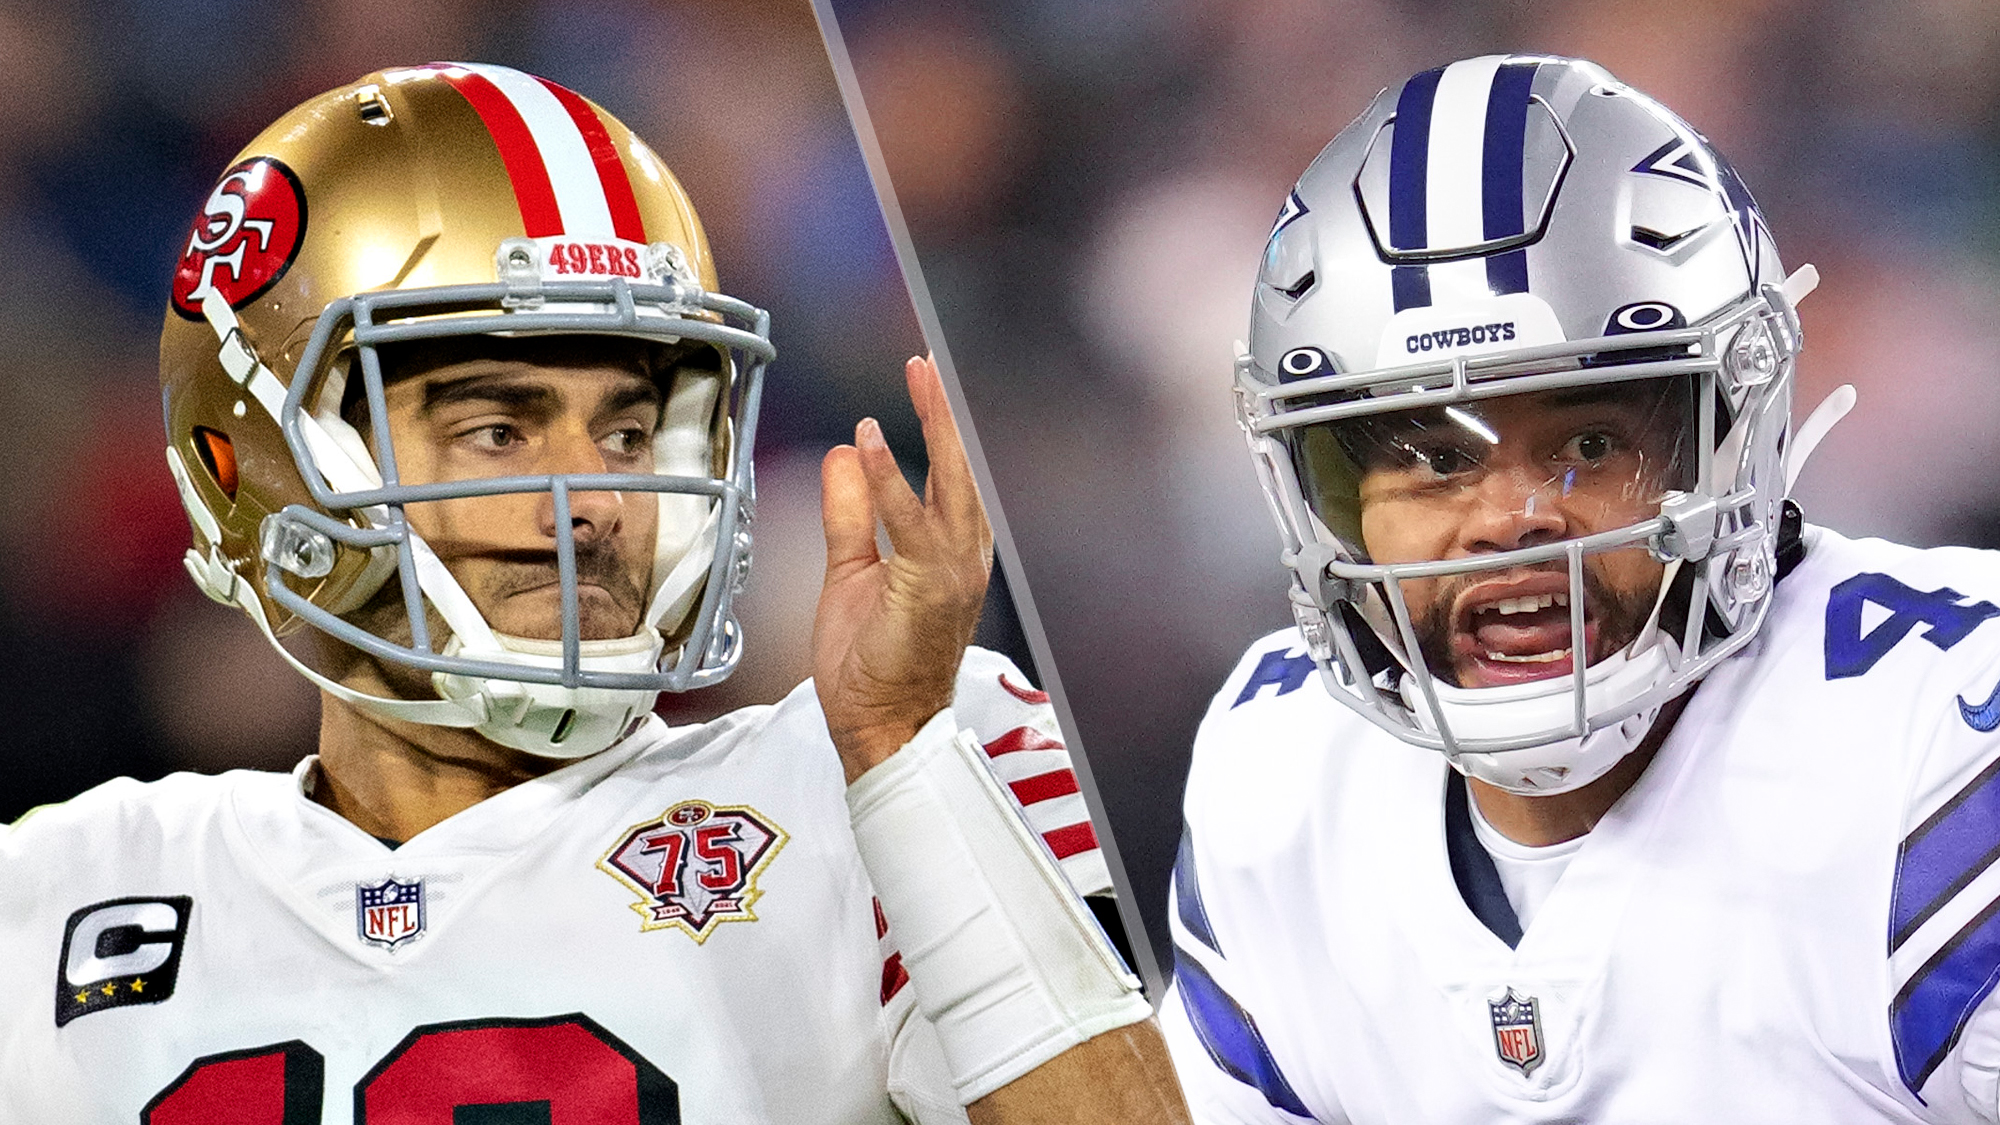 will the 49ers play the cowboys in the playoffs